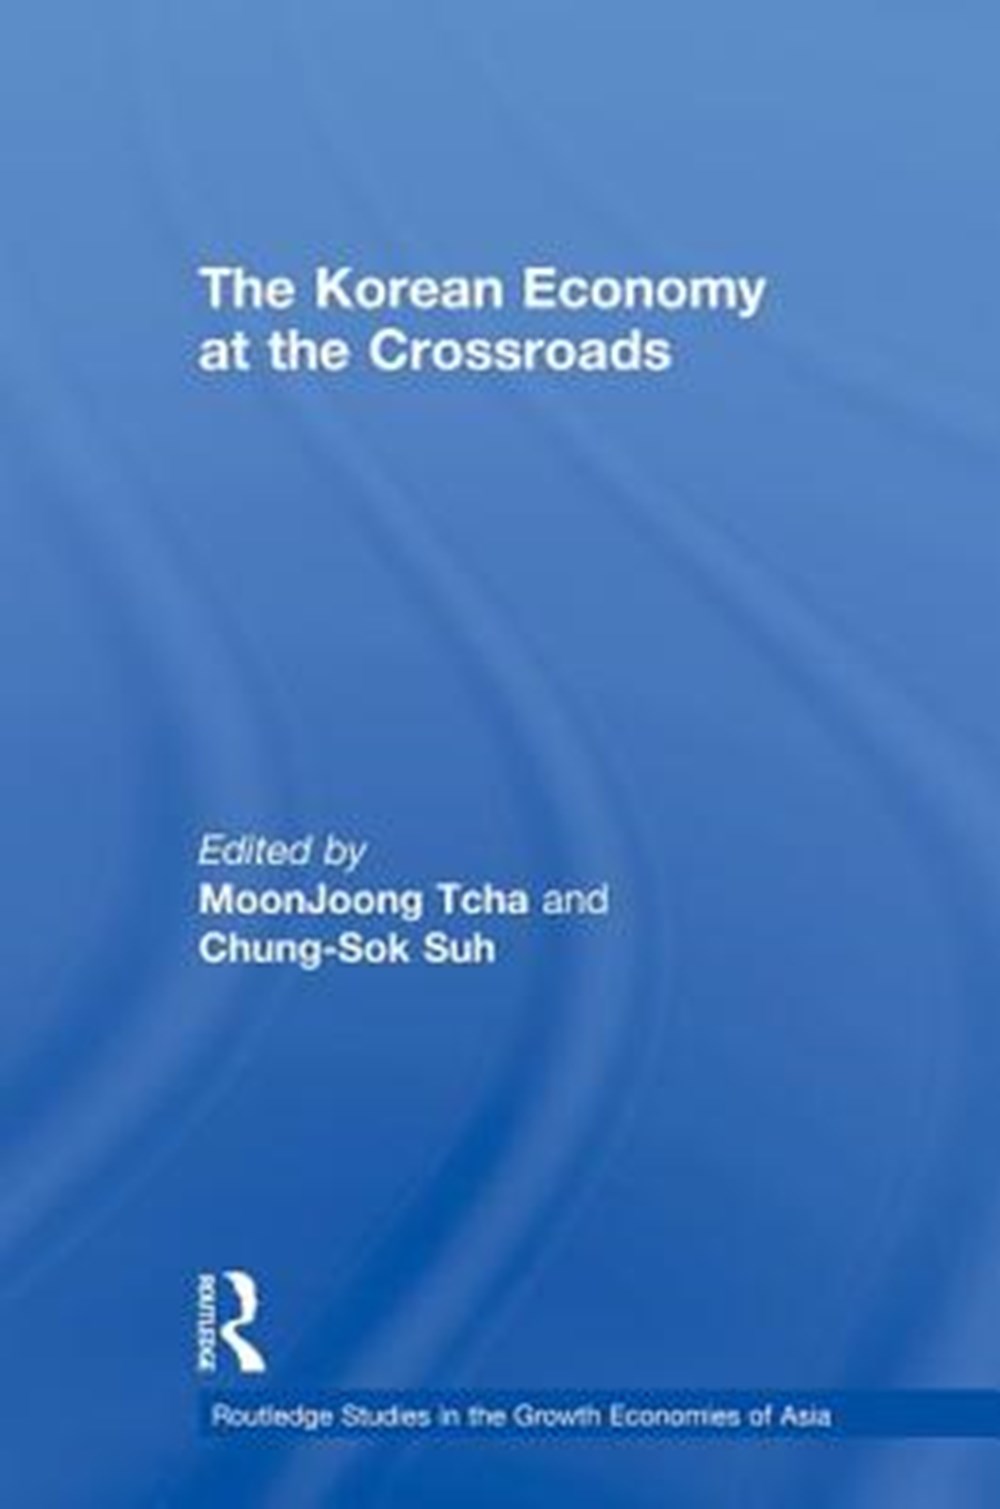 Korean Economy at the Crossroads Triumphs, Difficulties and Triumphs Again